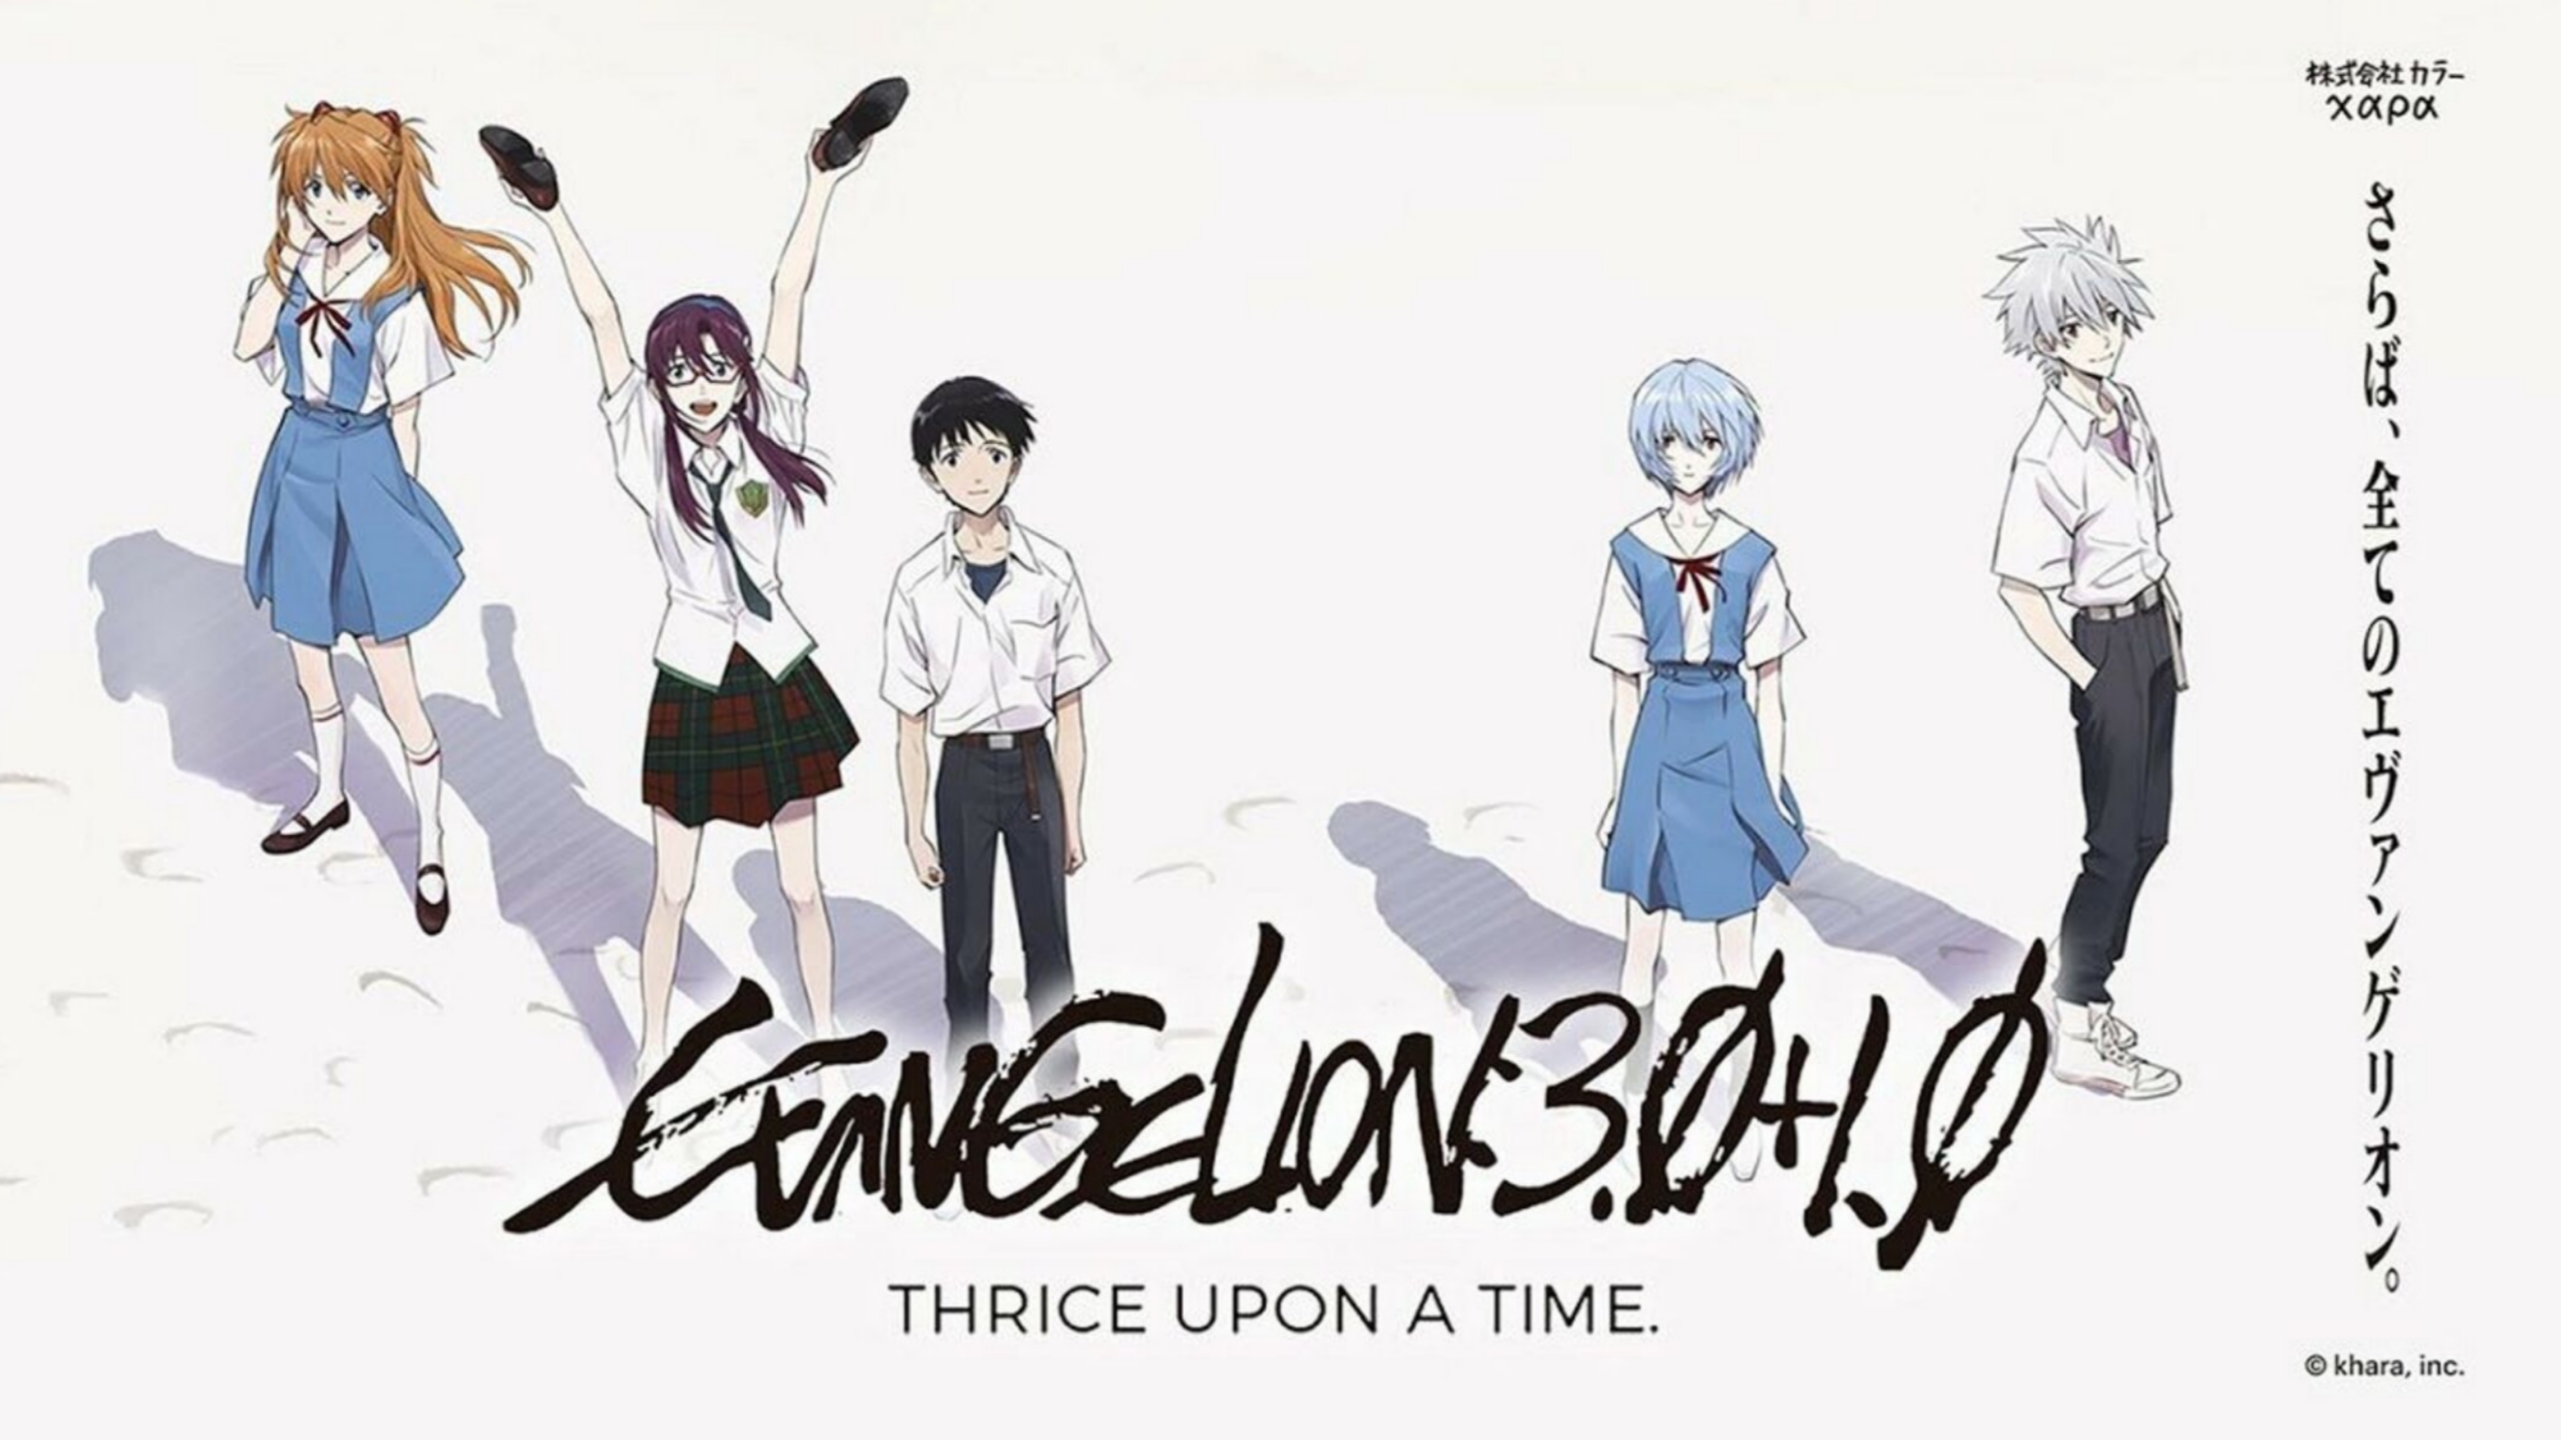 Rebuild of Evangelion 3.0+1.0 Thrice Upon a Time